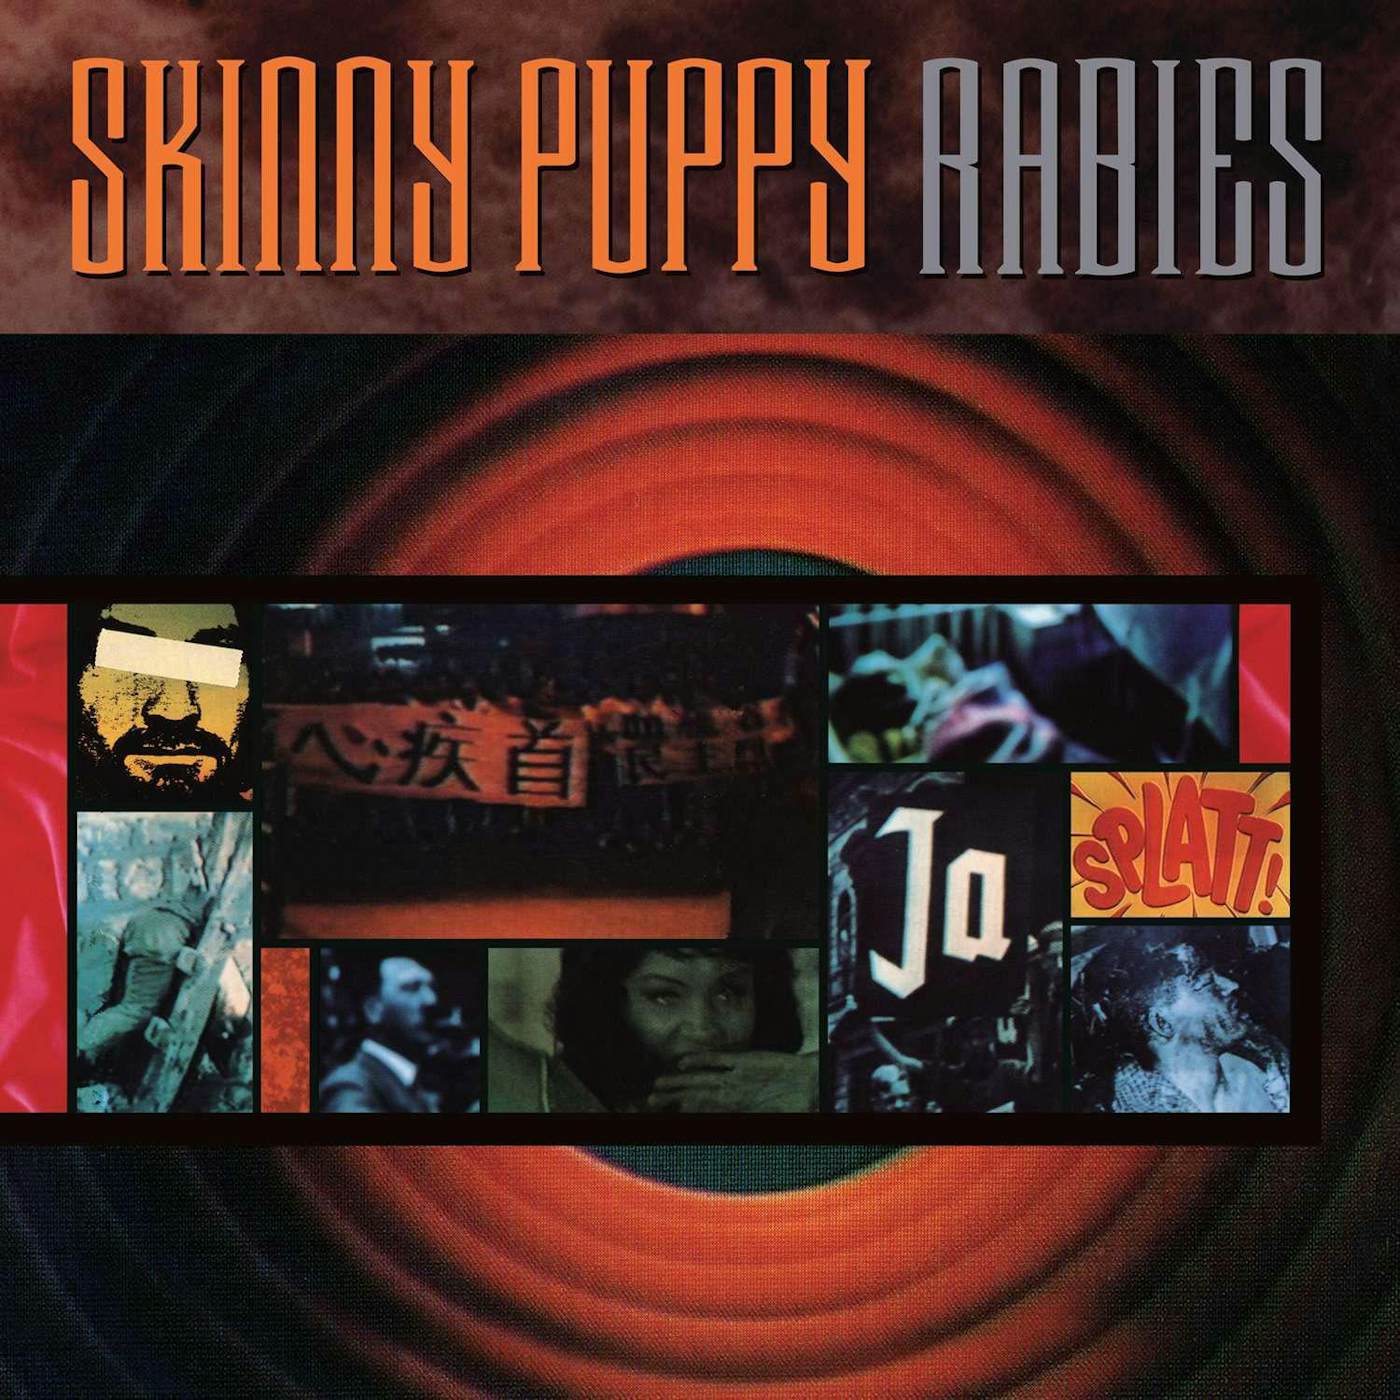 Play [PIAS] 40 by Skinny Puppy on  Music